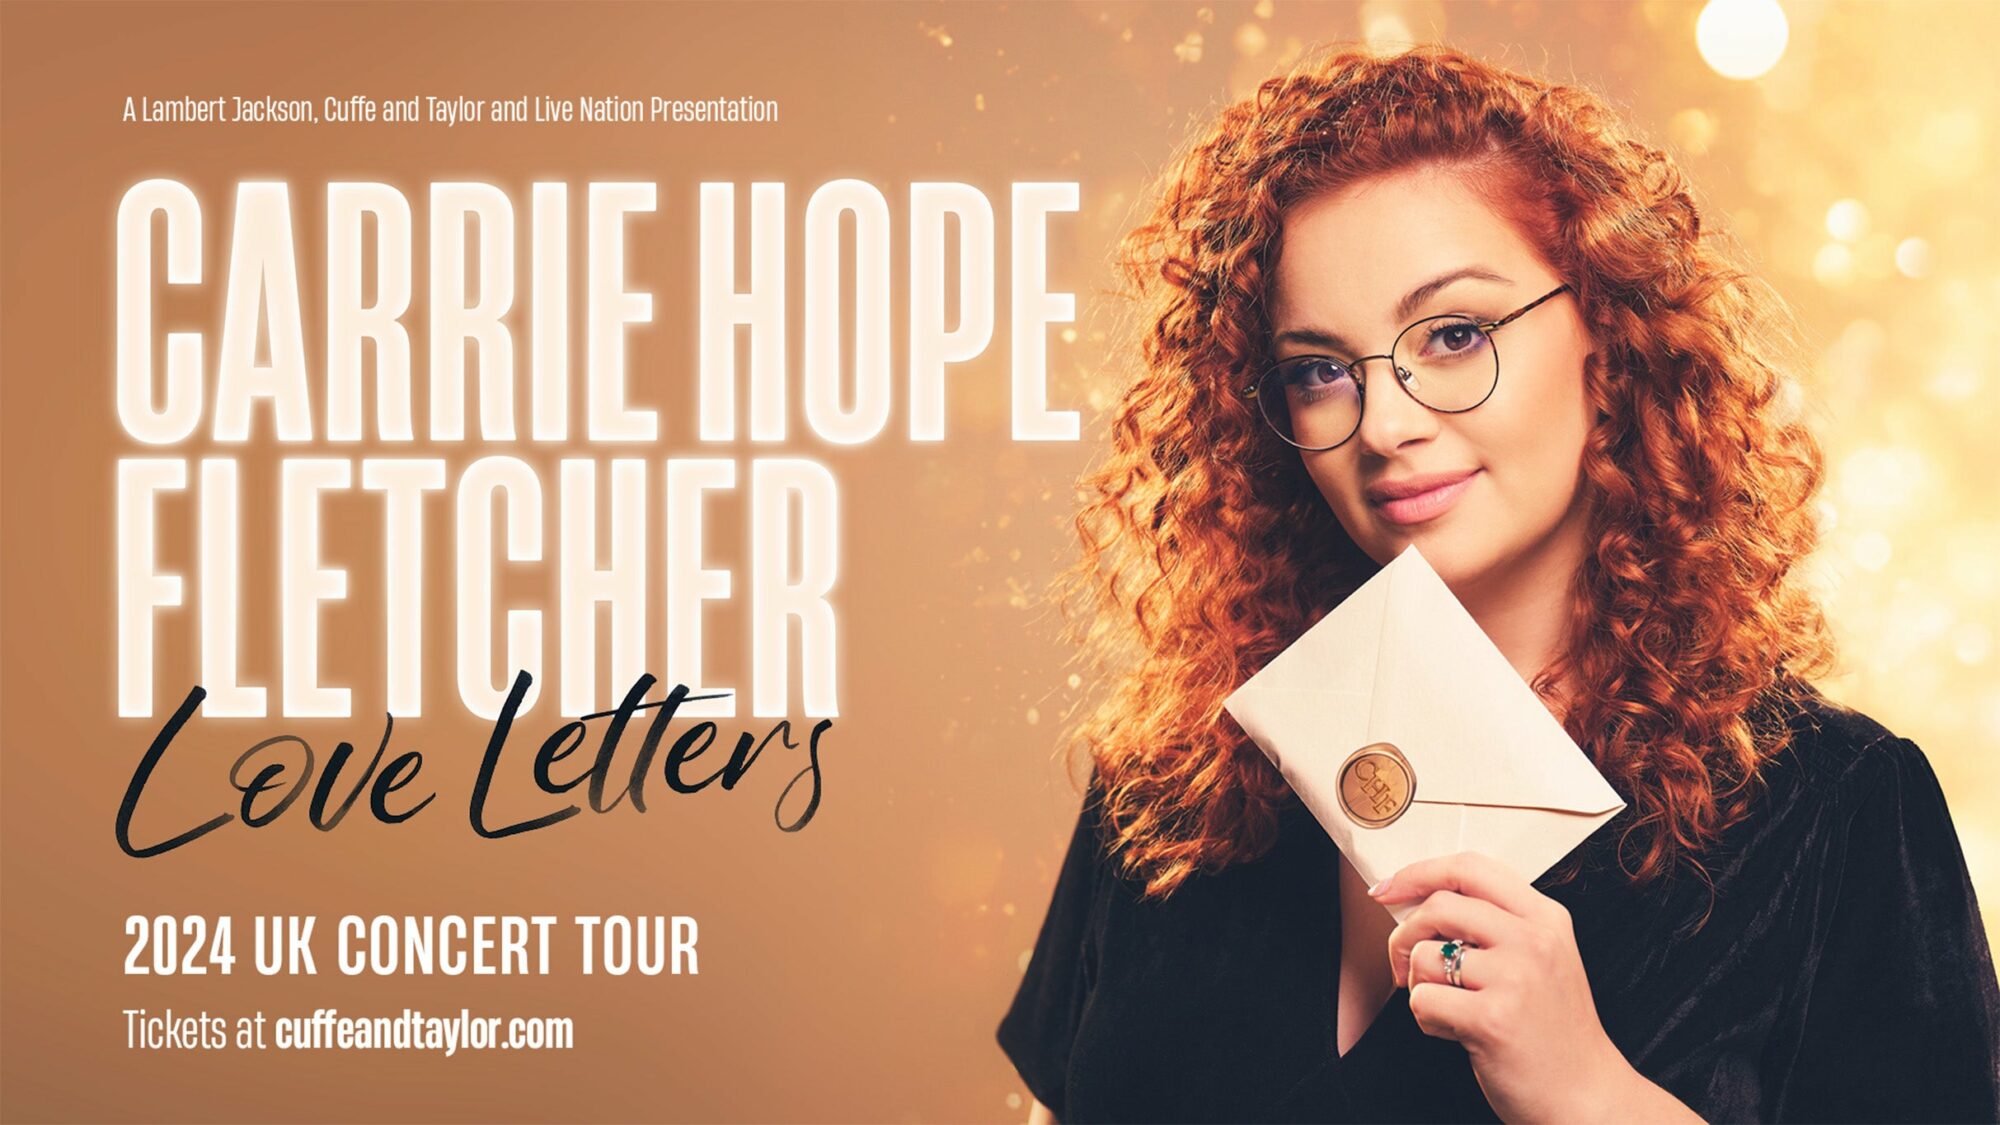 Image name Carrie Hope Fletcher Love Letters at York Barbican York the 20 image from the post Carrie Hope Fletcher - Love Letters at York Barbican, York in Yorkshire.com.